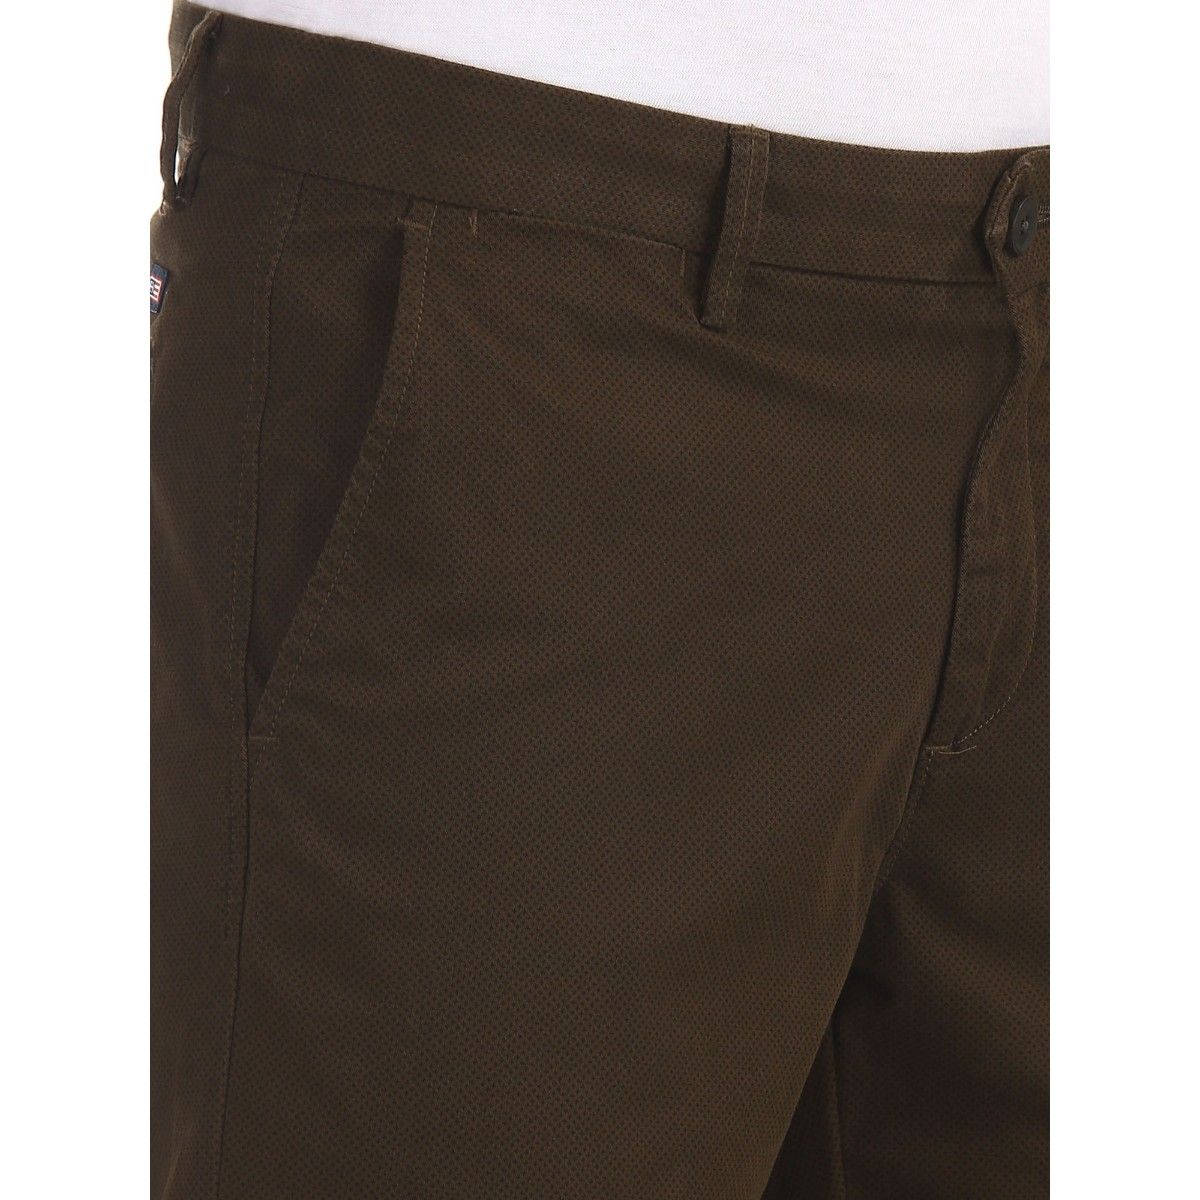 Buy Arrow Sports Chrysler Slim Fit Flat Front Trousers - NNNOW.com